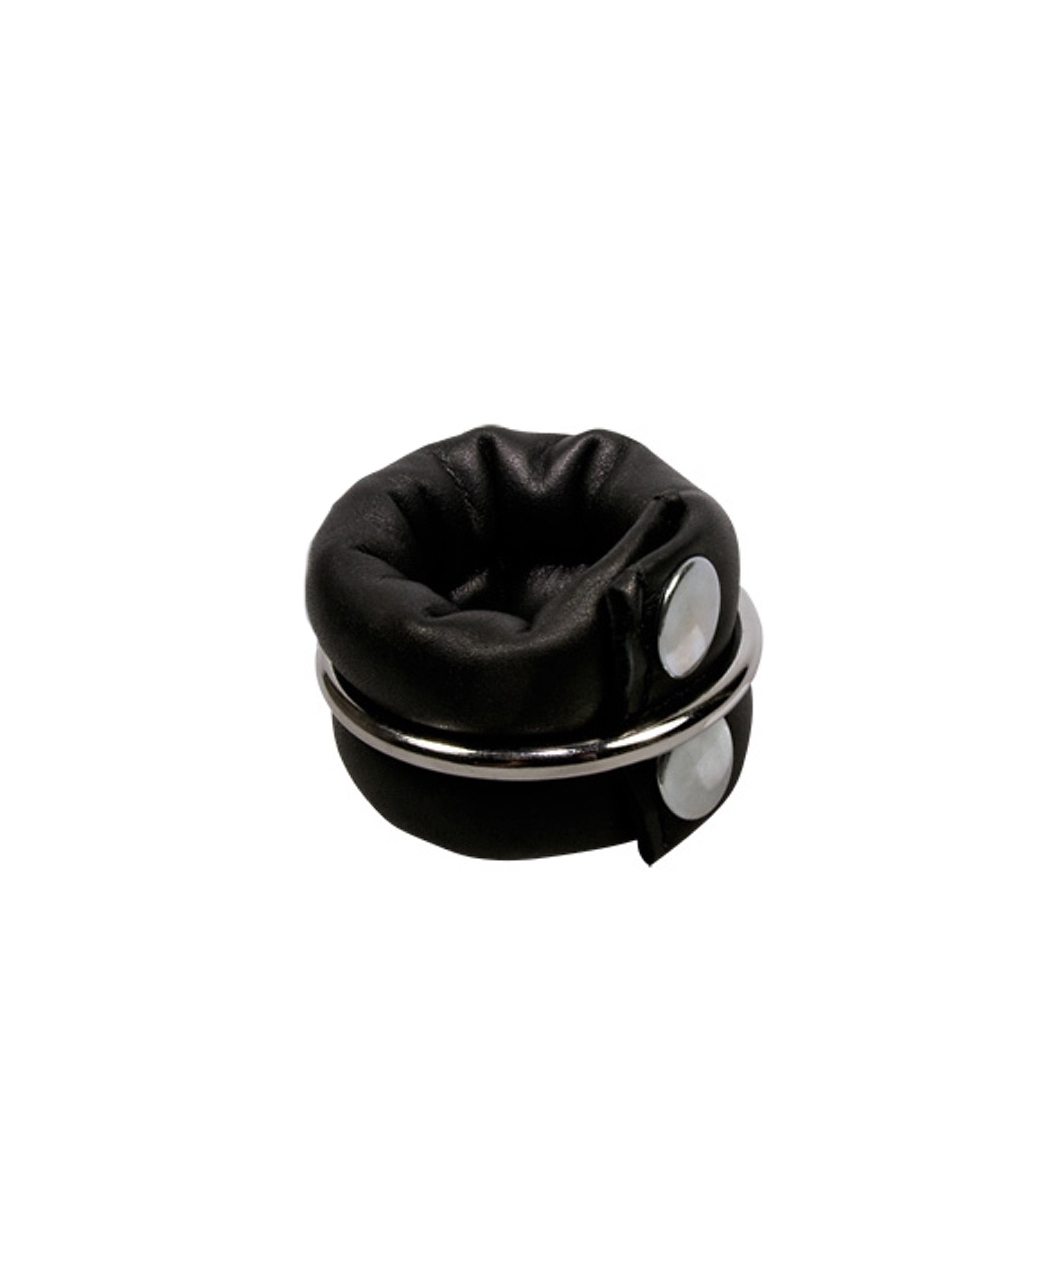 Sextreme Metal/Leather Cock Ring